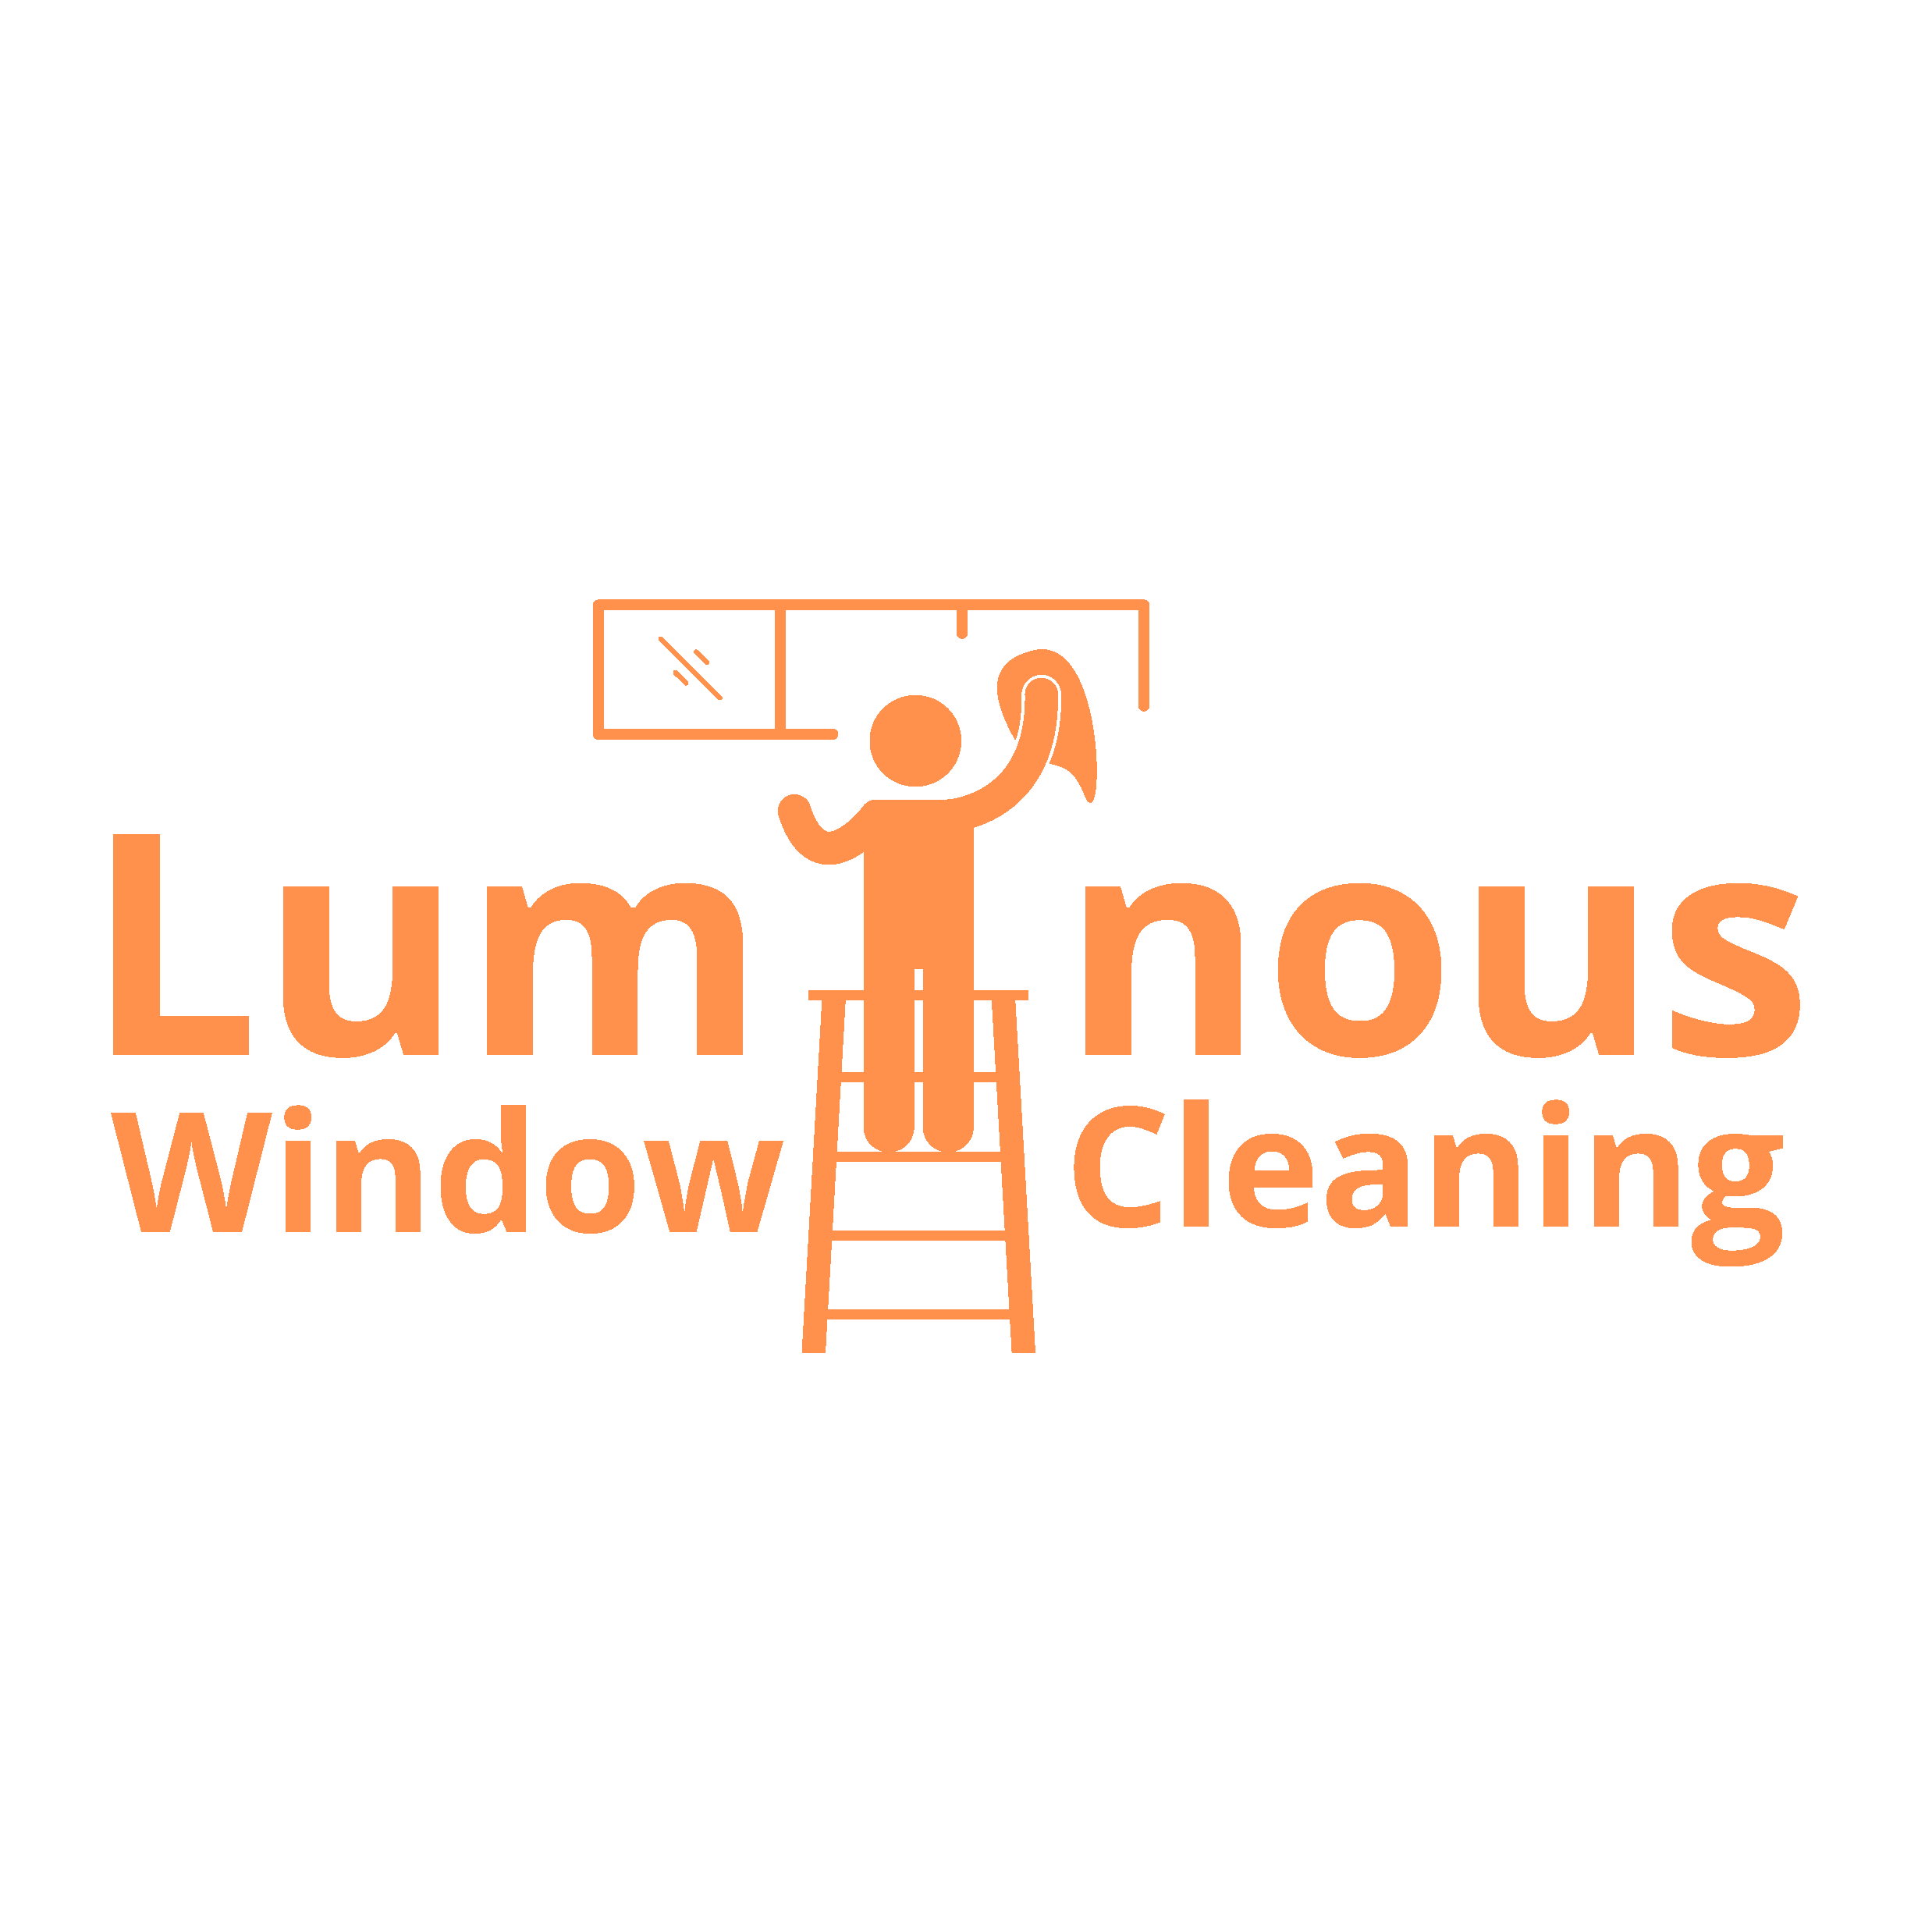 A person on a ladder cleaning windows.